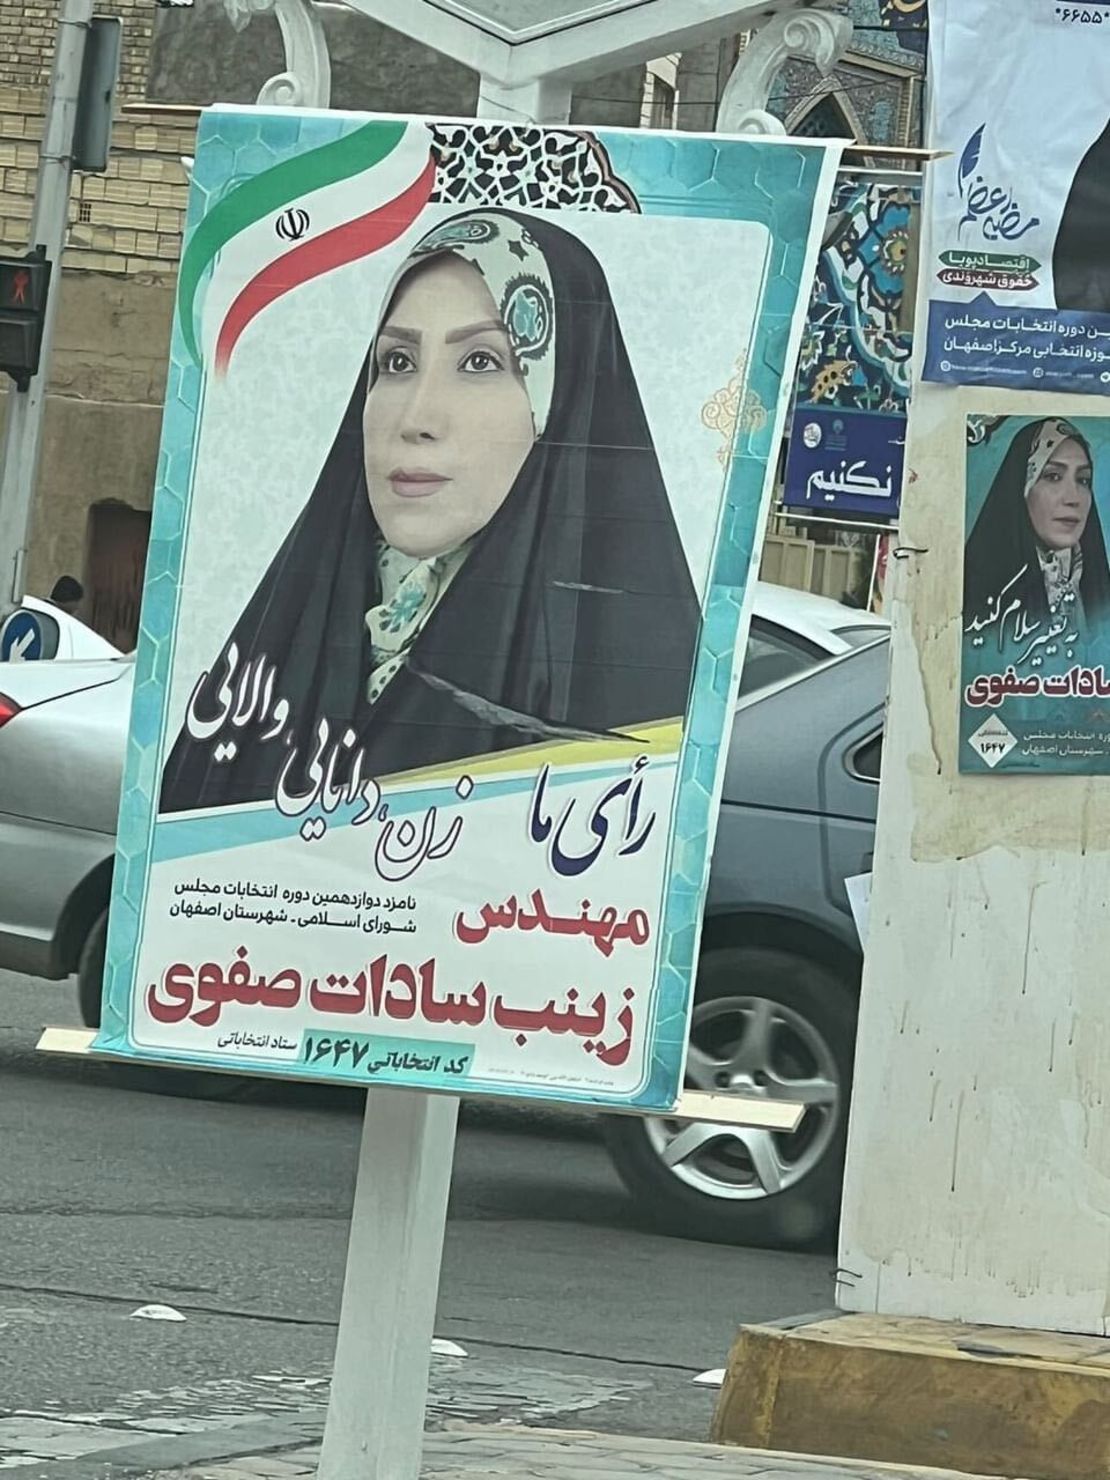 An election poster for a female parliamentary candidate apparently plays on the 'Woman-Life-Freedom' protest slogan, replacing it with 'Woman-Wisdom-Greatness' in Isfahan, Iran on February 24.